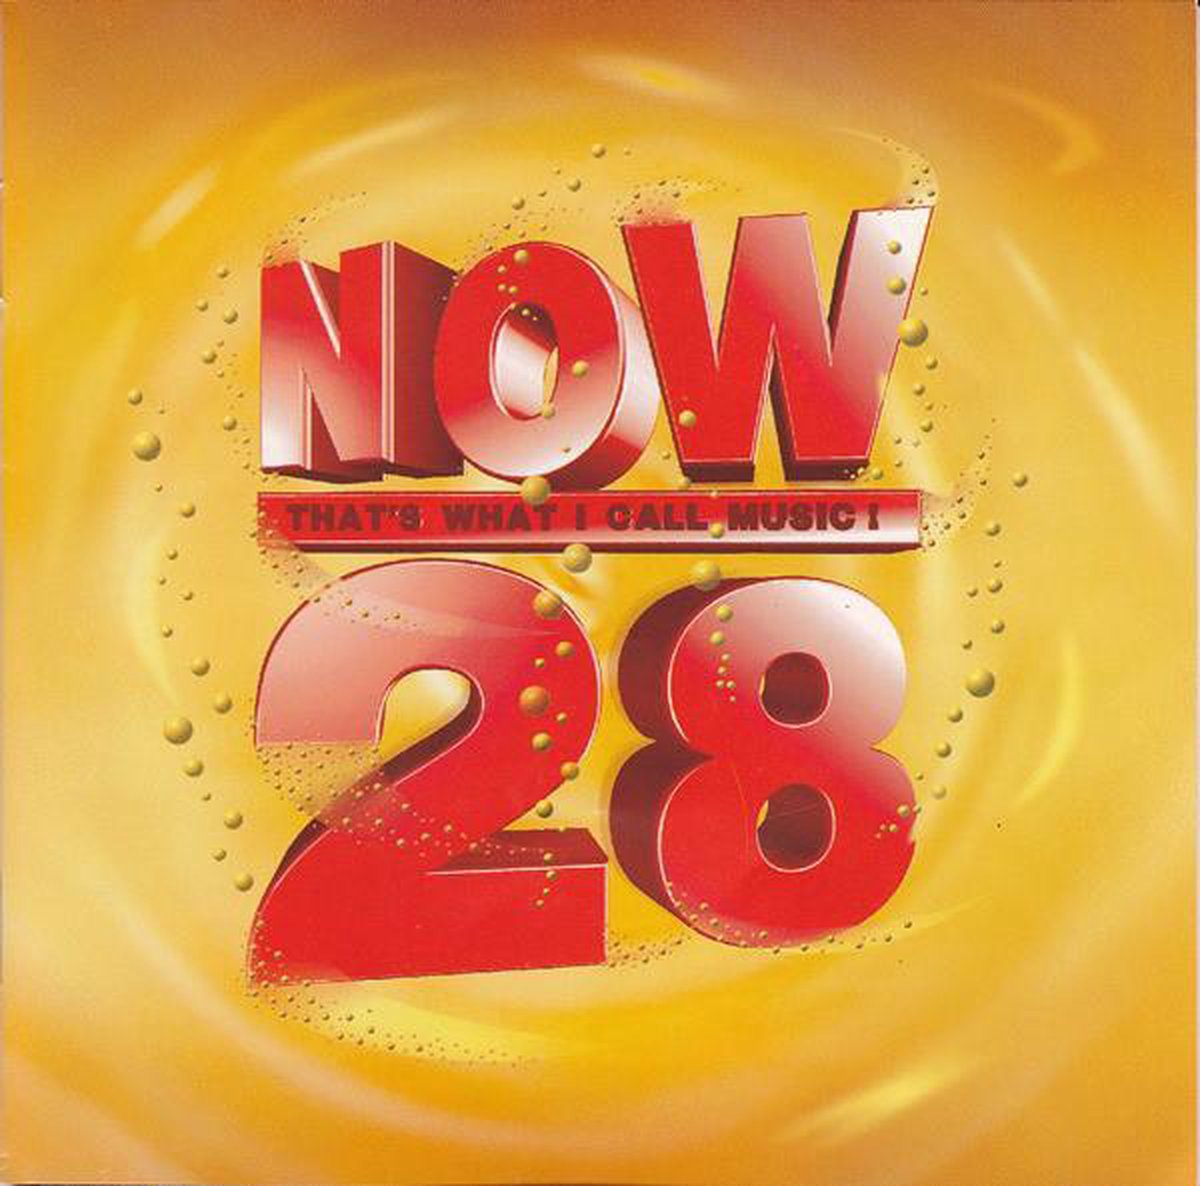 Now That's What I Call Music! 28 [UK] - various artists